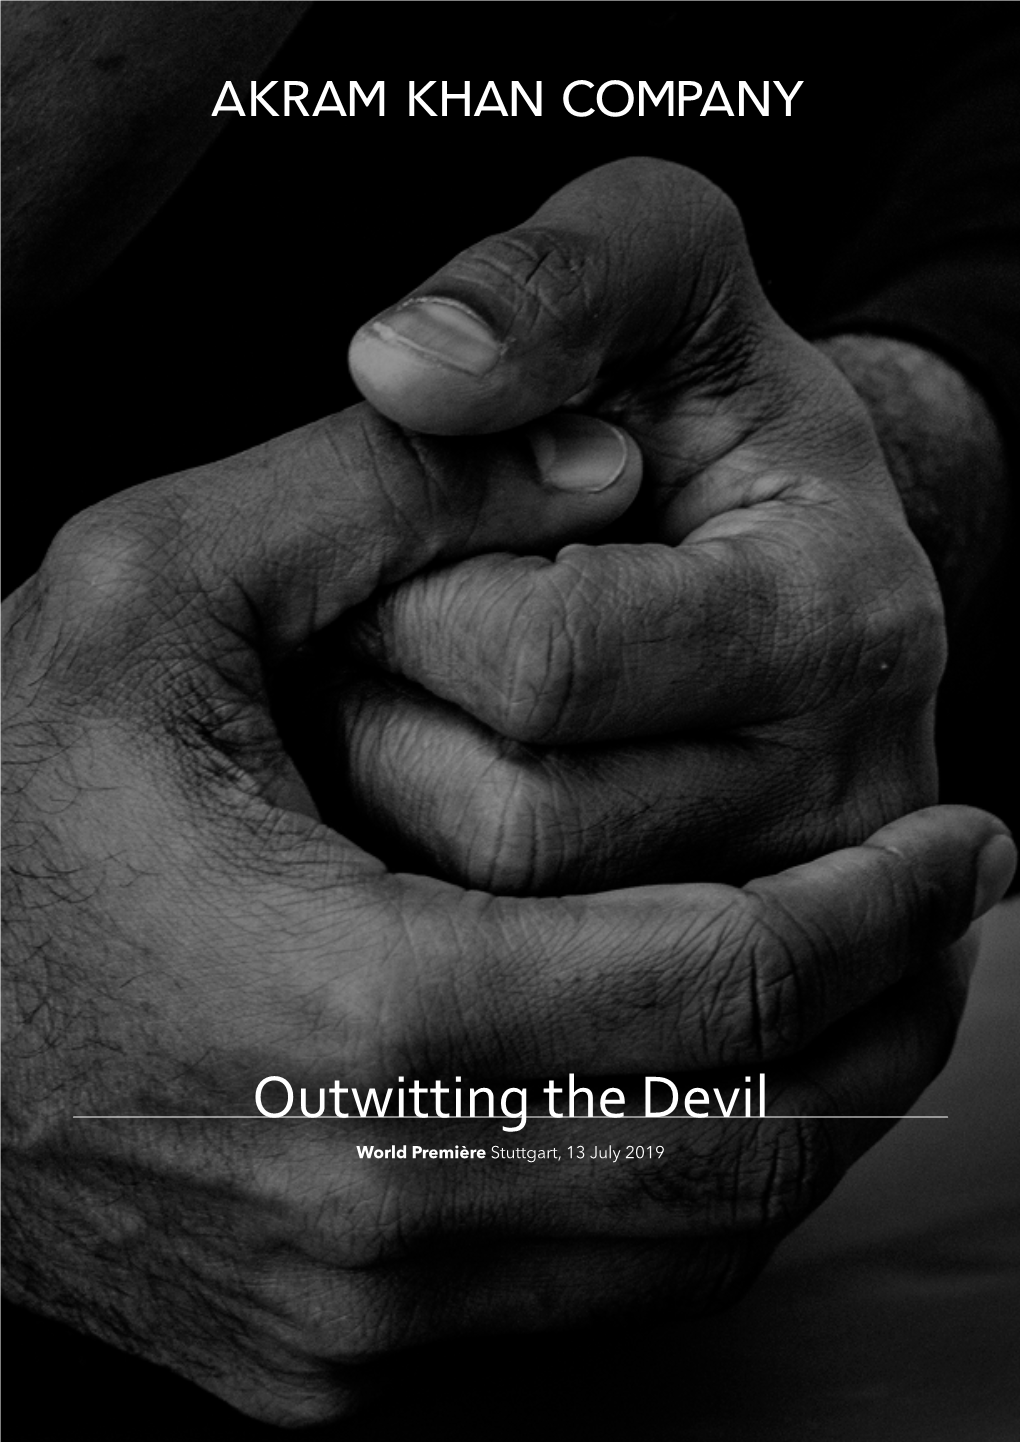 Outwitting the Devil World Première Stuttgart, 13 July 2019 “As I Arrive at the End of My Dancing Career, I Have Awakened to a New Way of Dancing